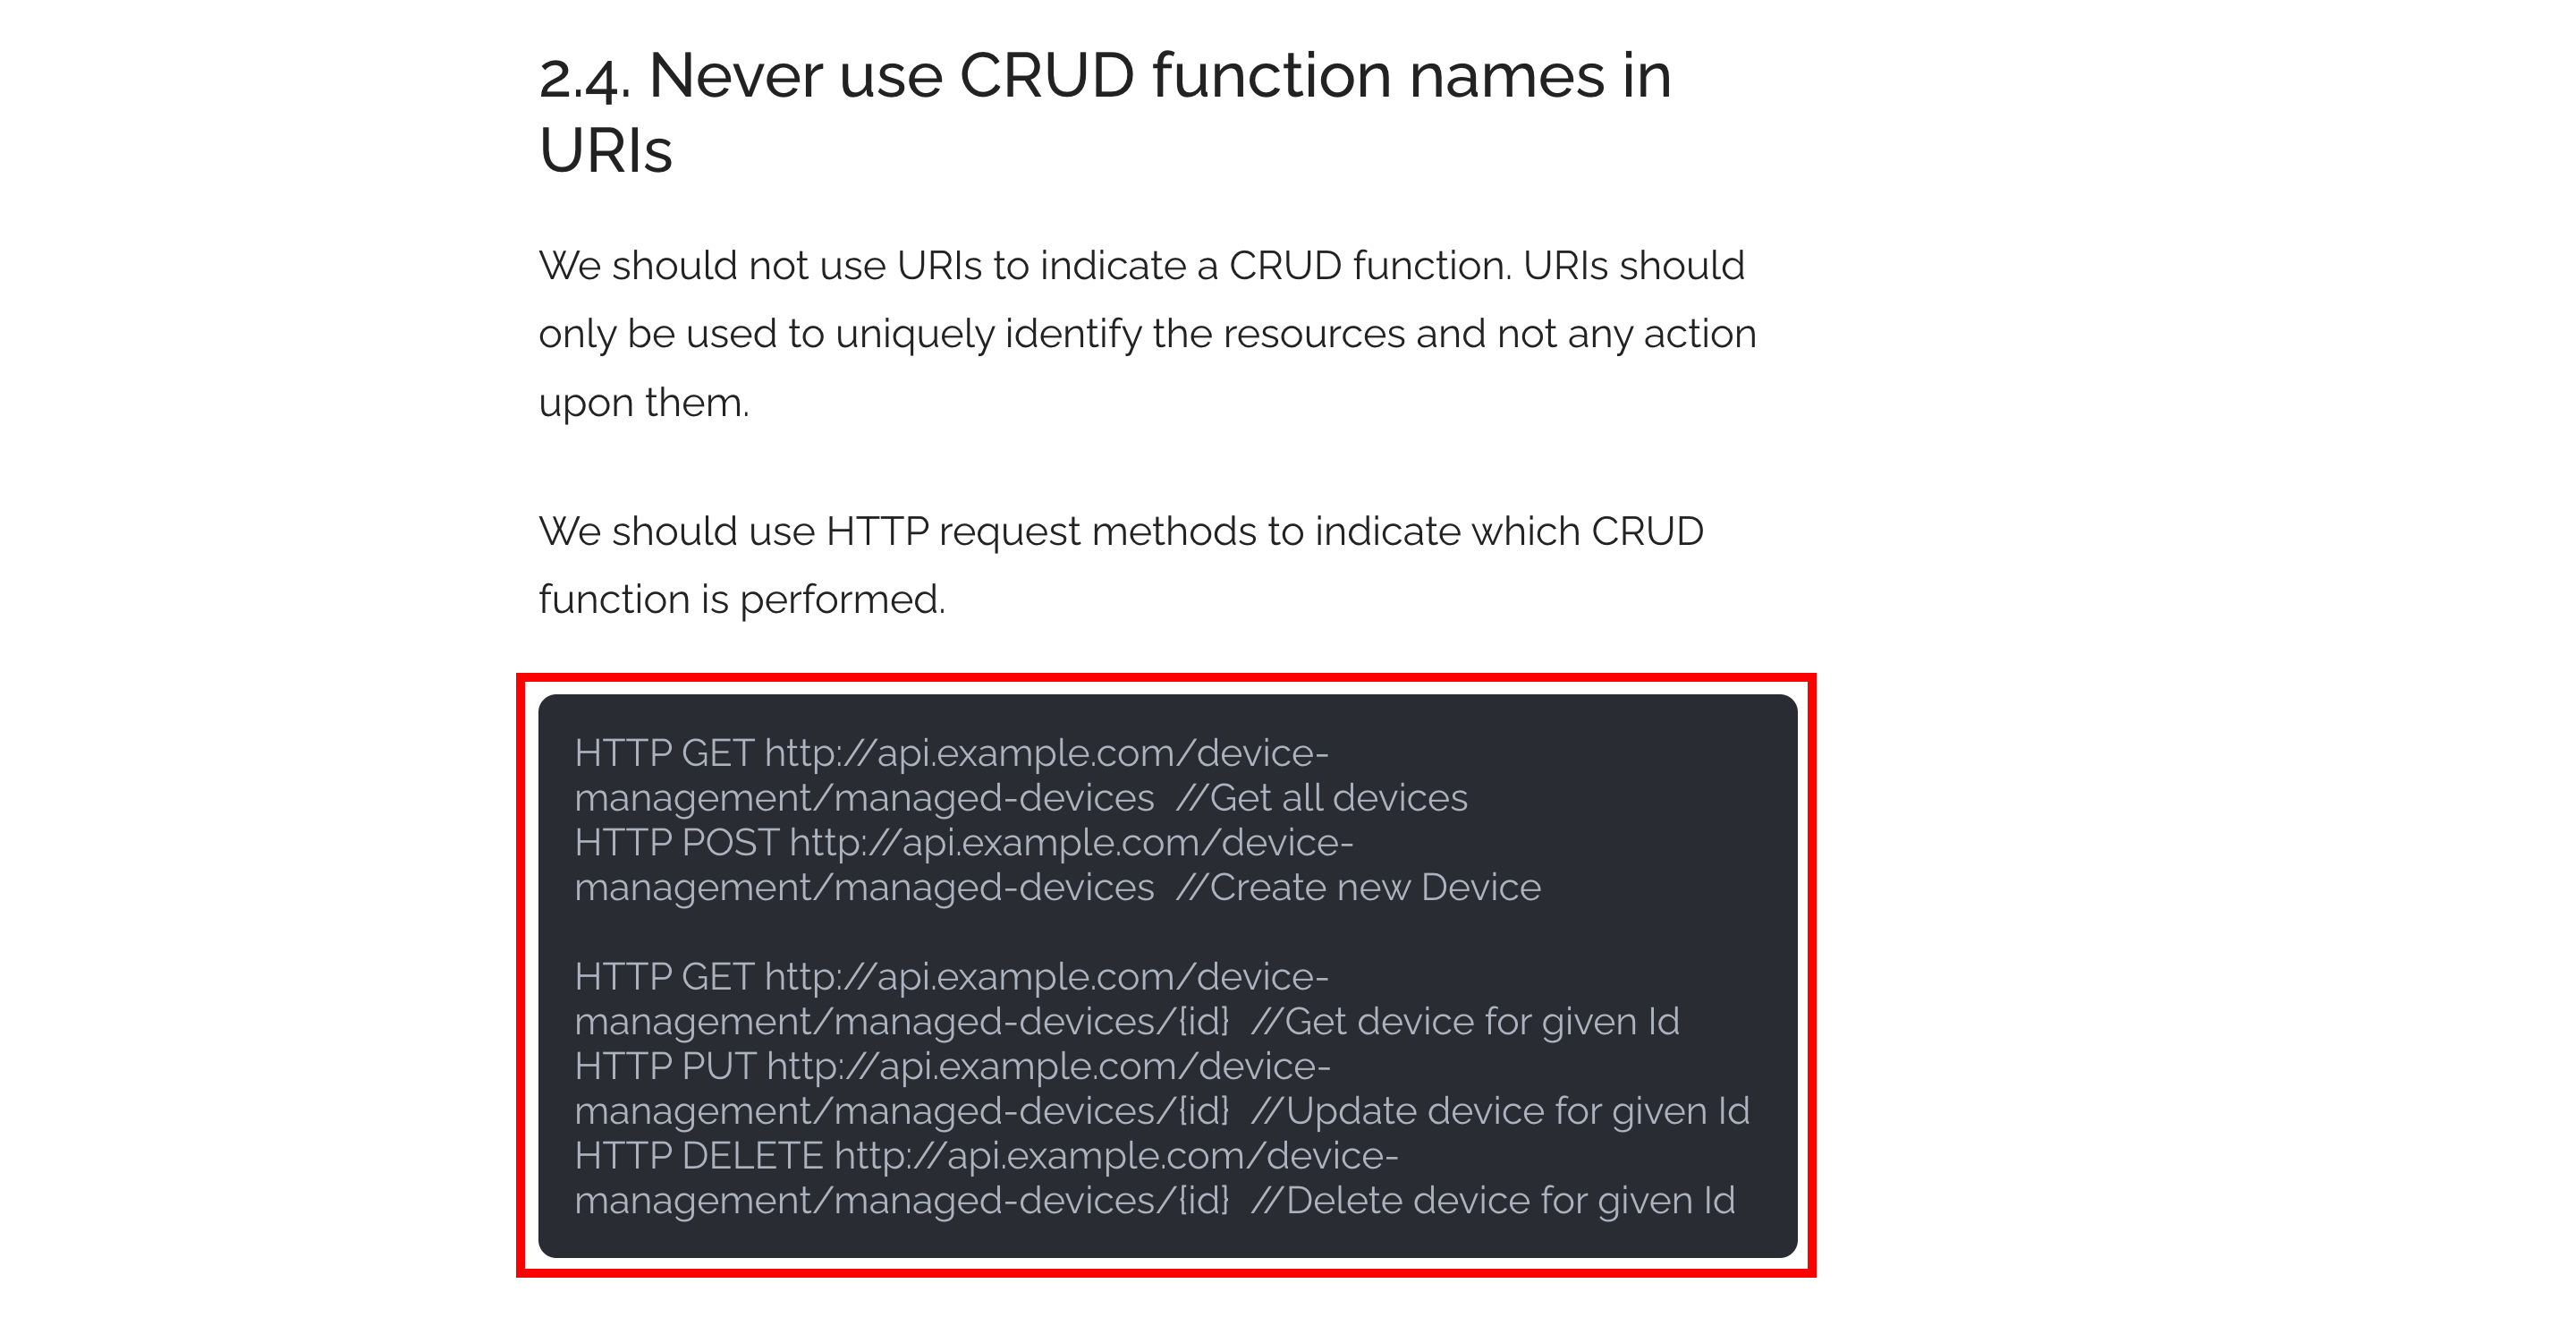 Never use CRUD functions name